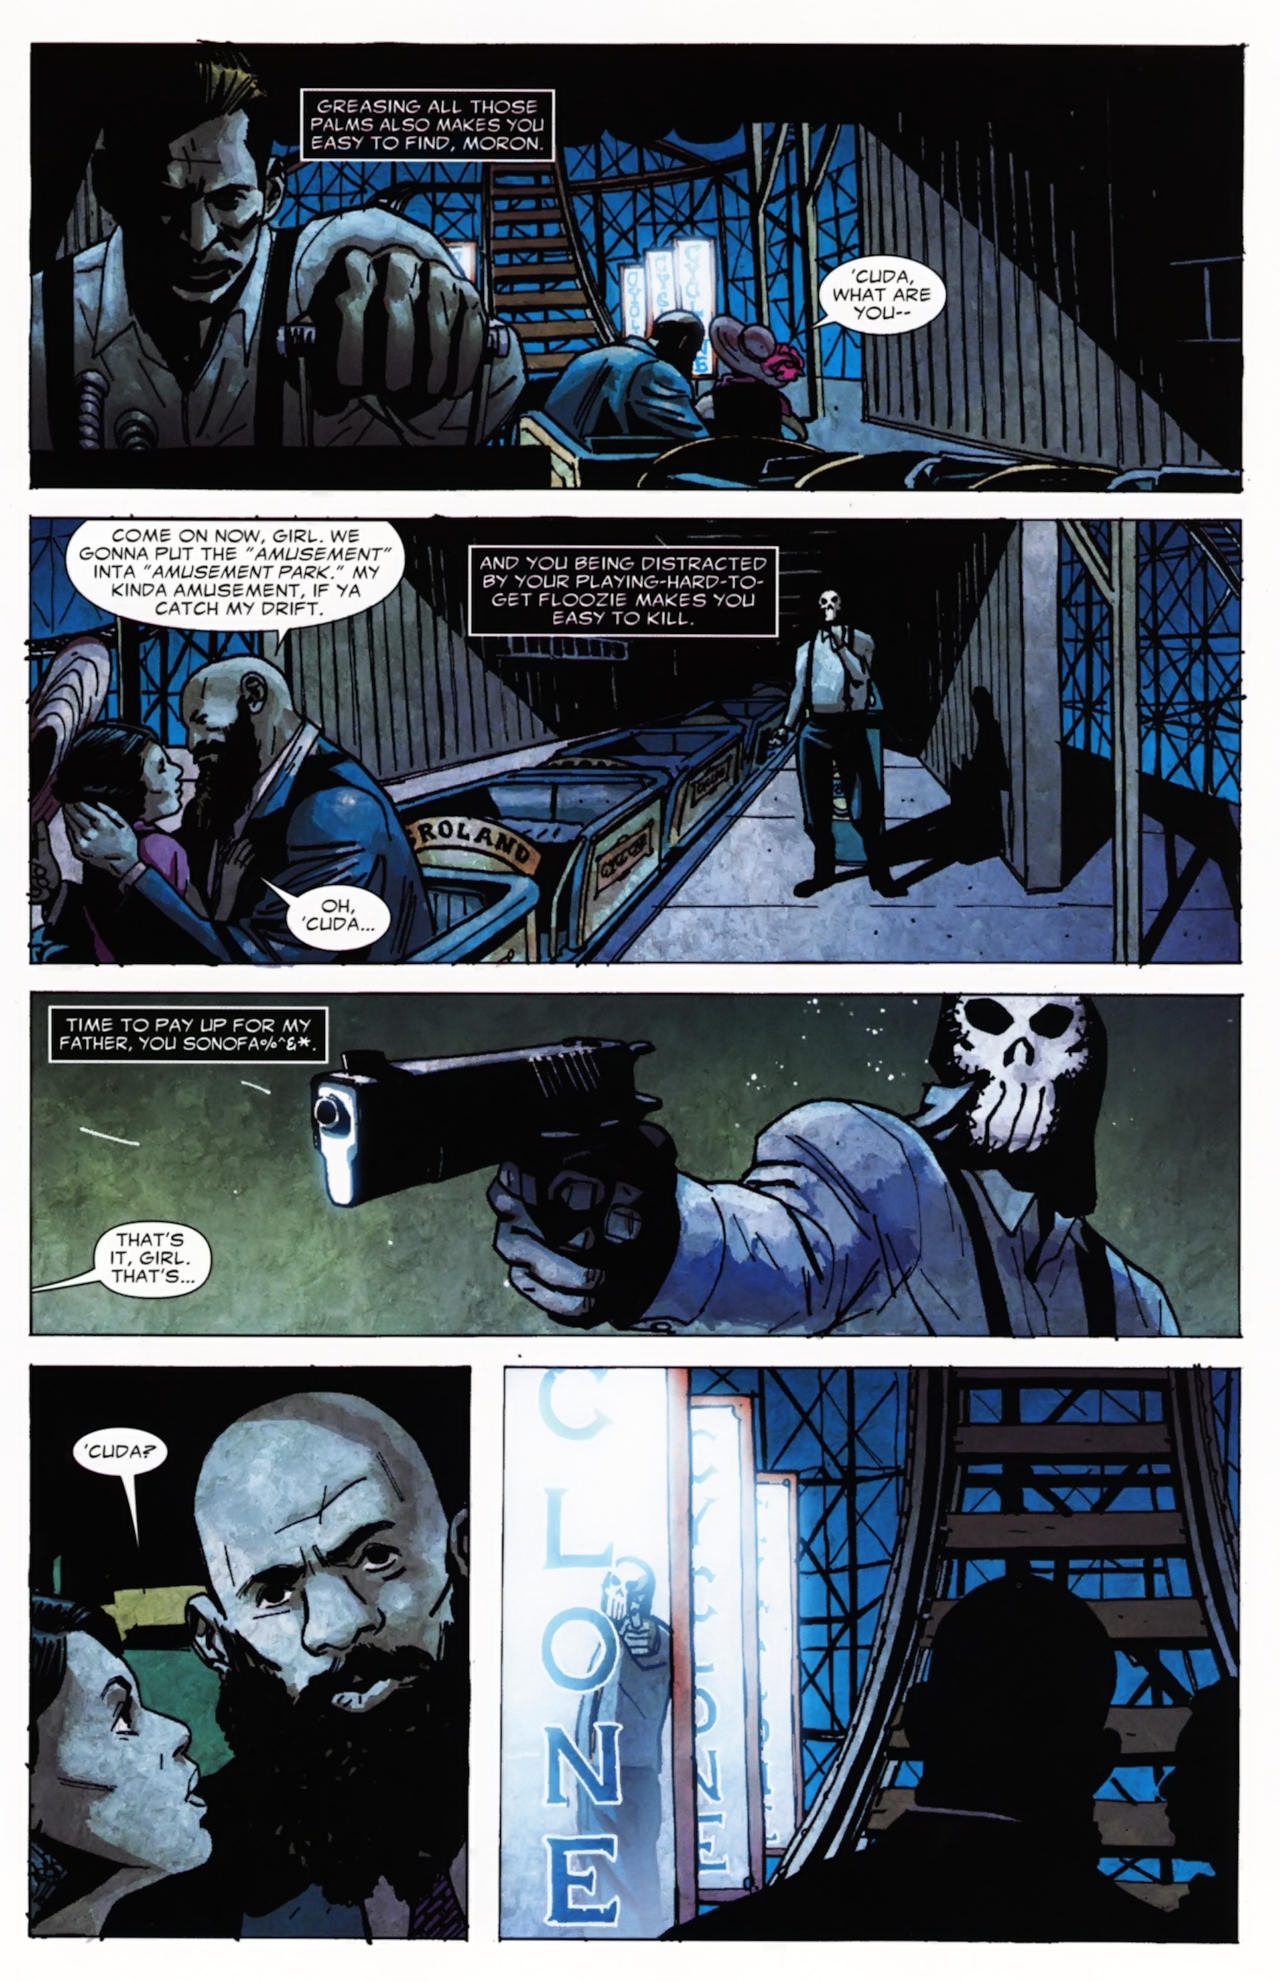 Punisher Noir #3 (of 4) - Two Down...